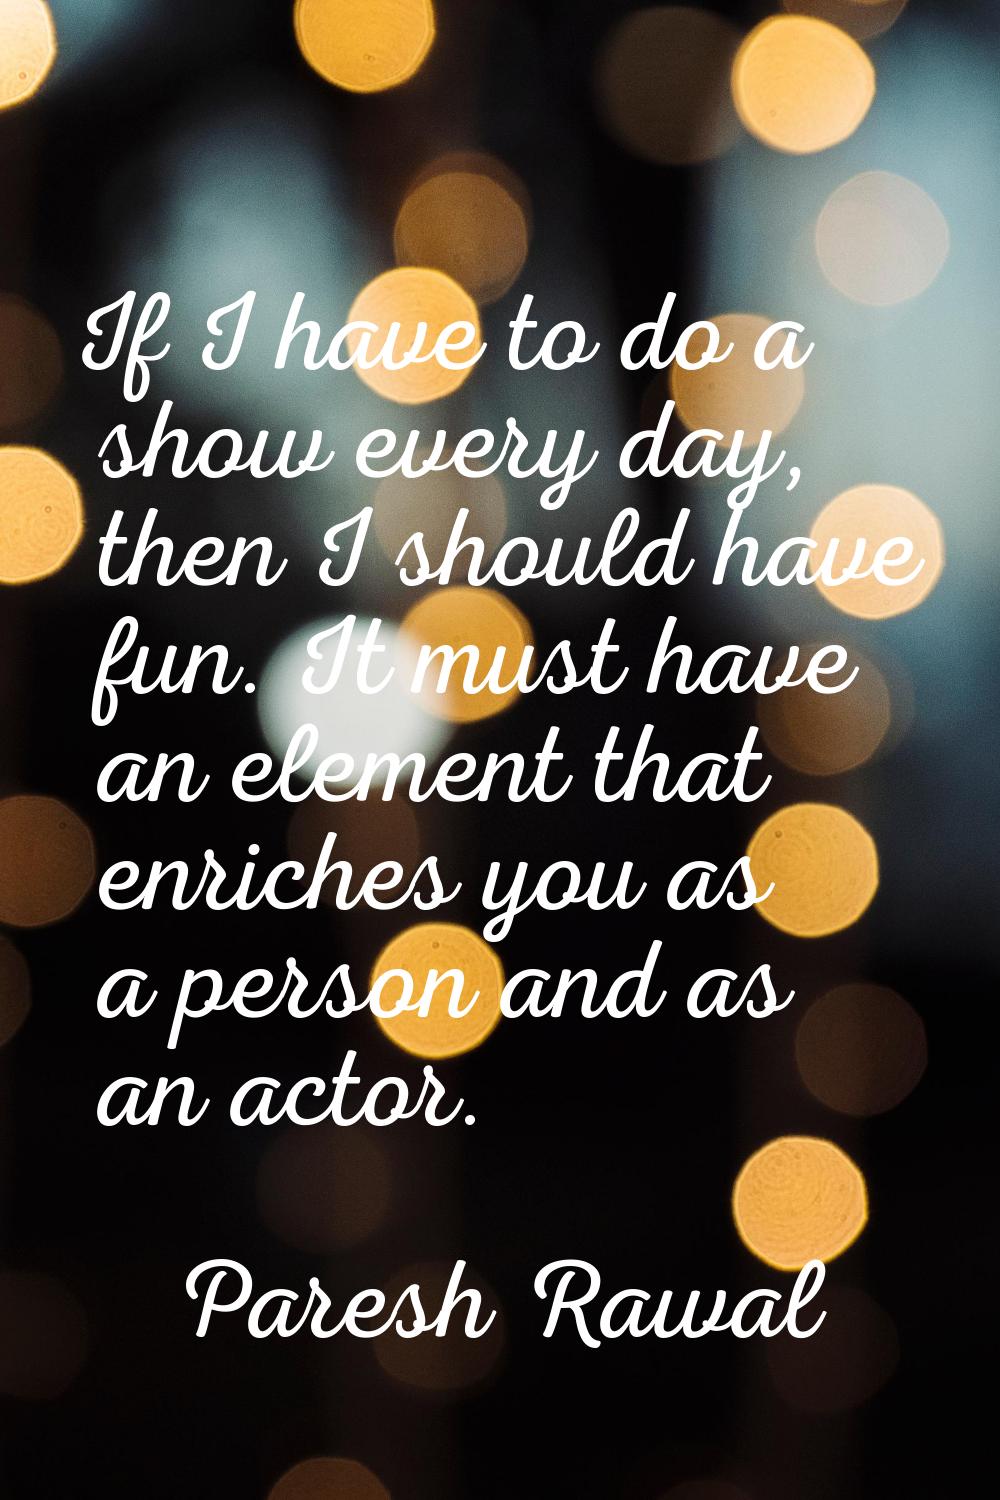 If I have to do a show every day, then I should have fun. It must have an element that enriches you